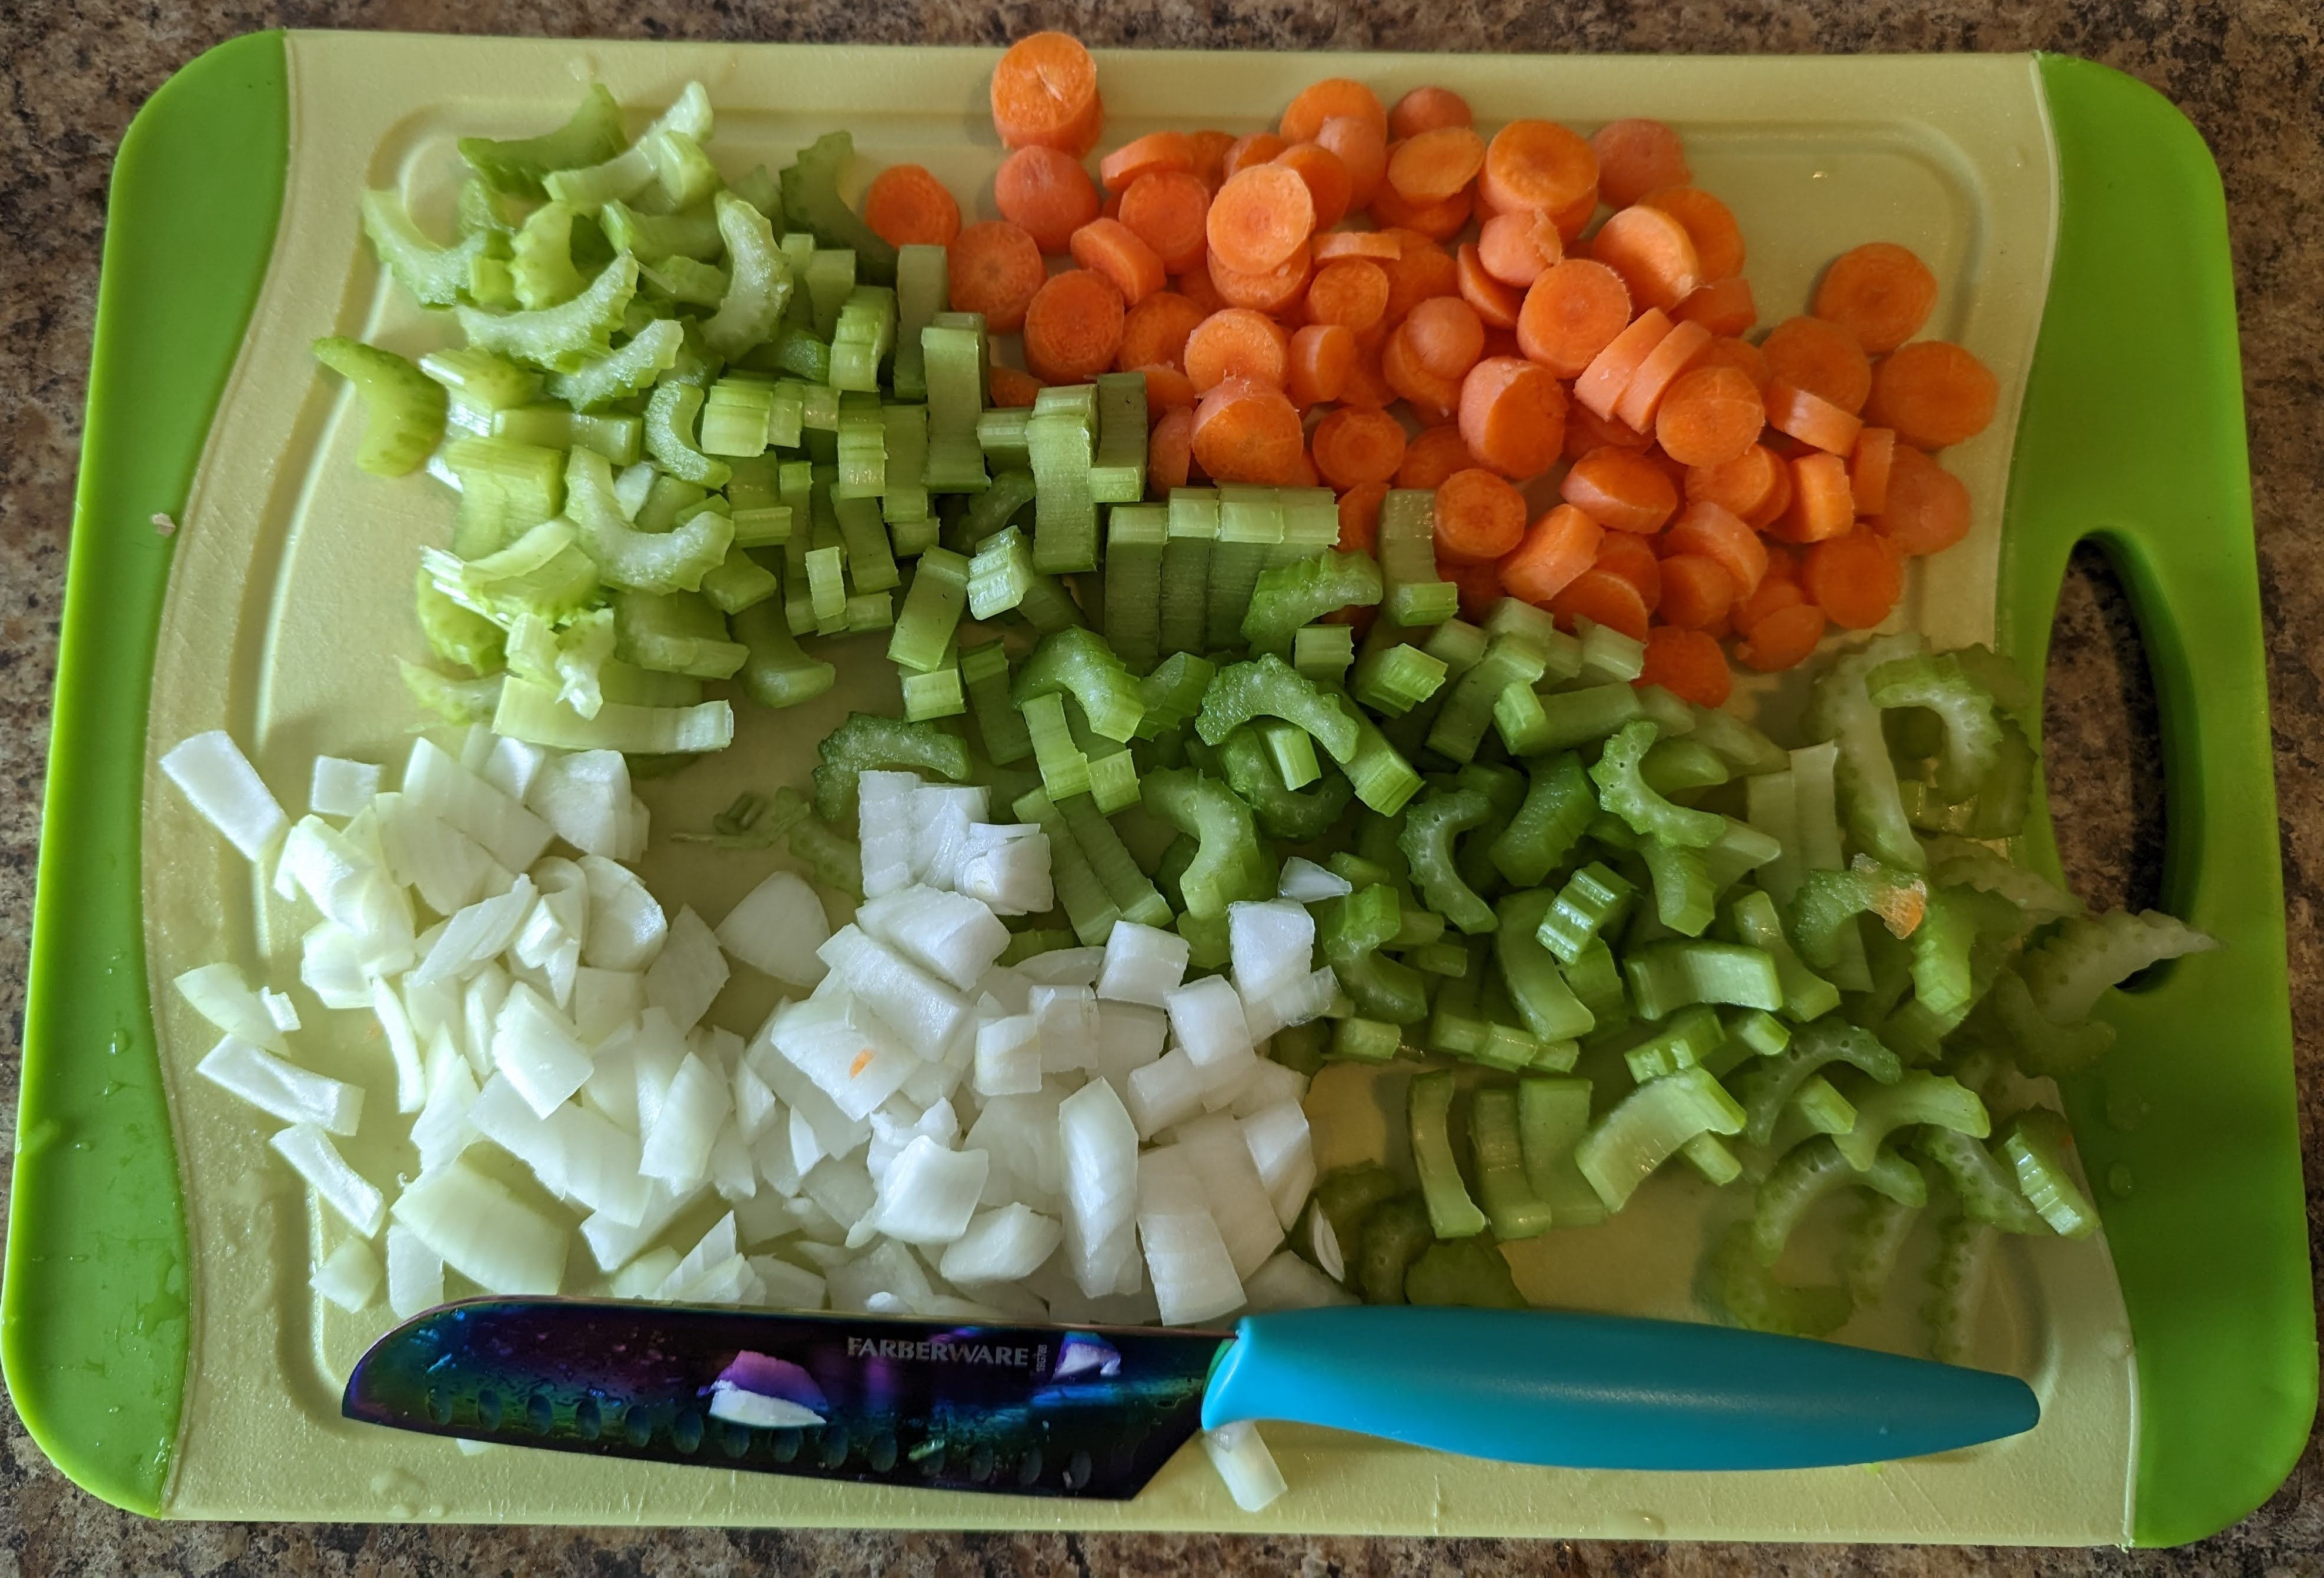 Add diced vegetables